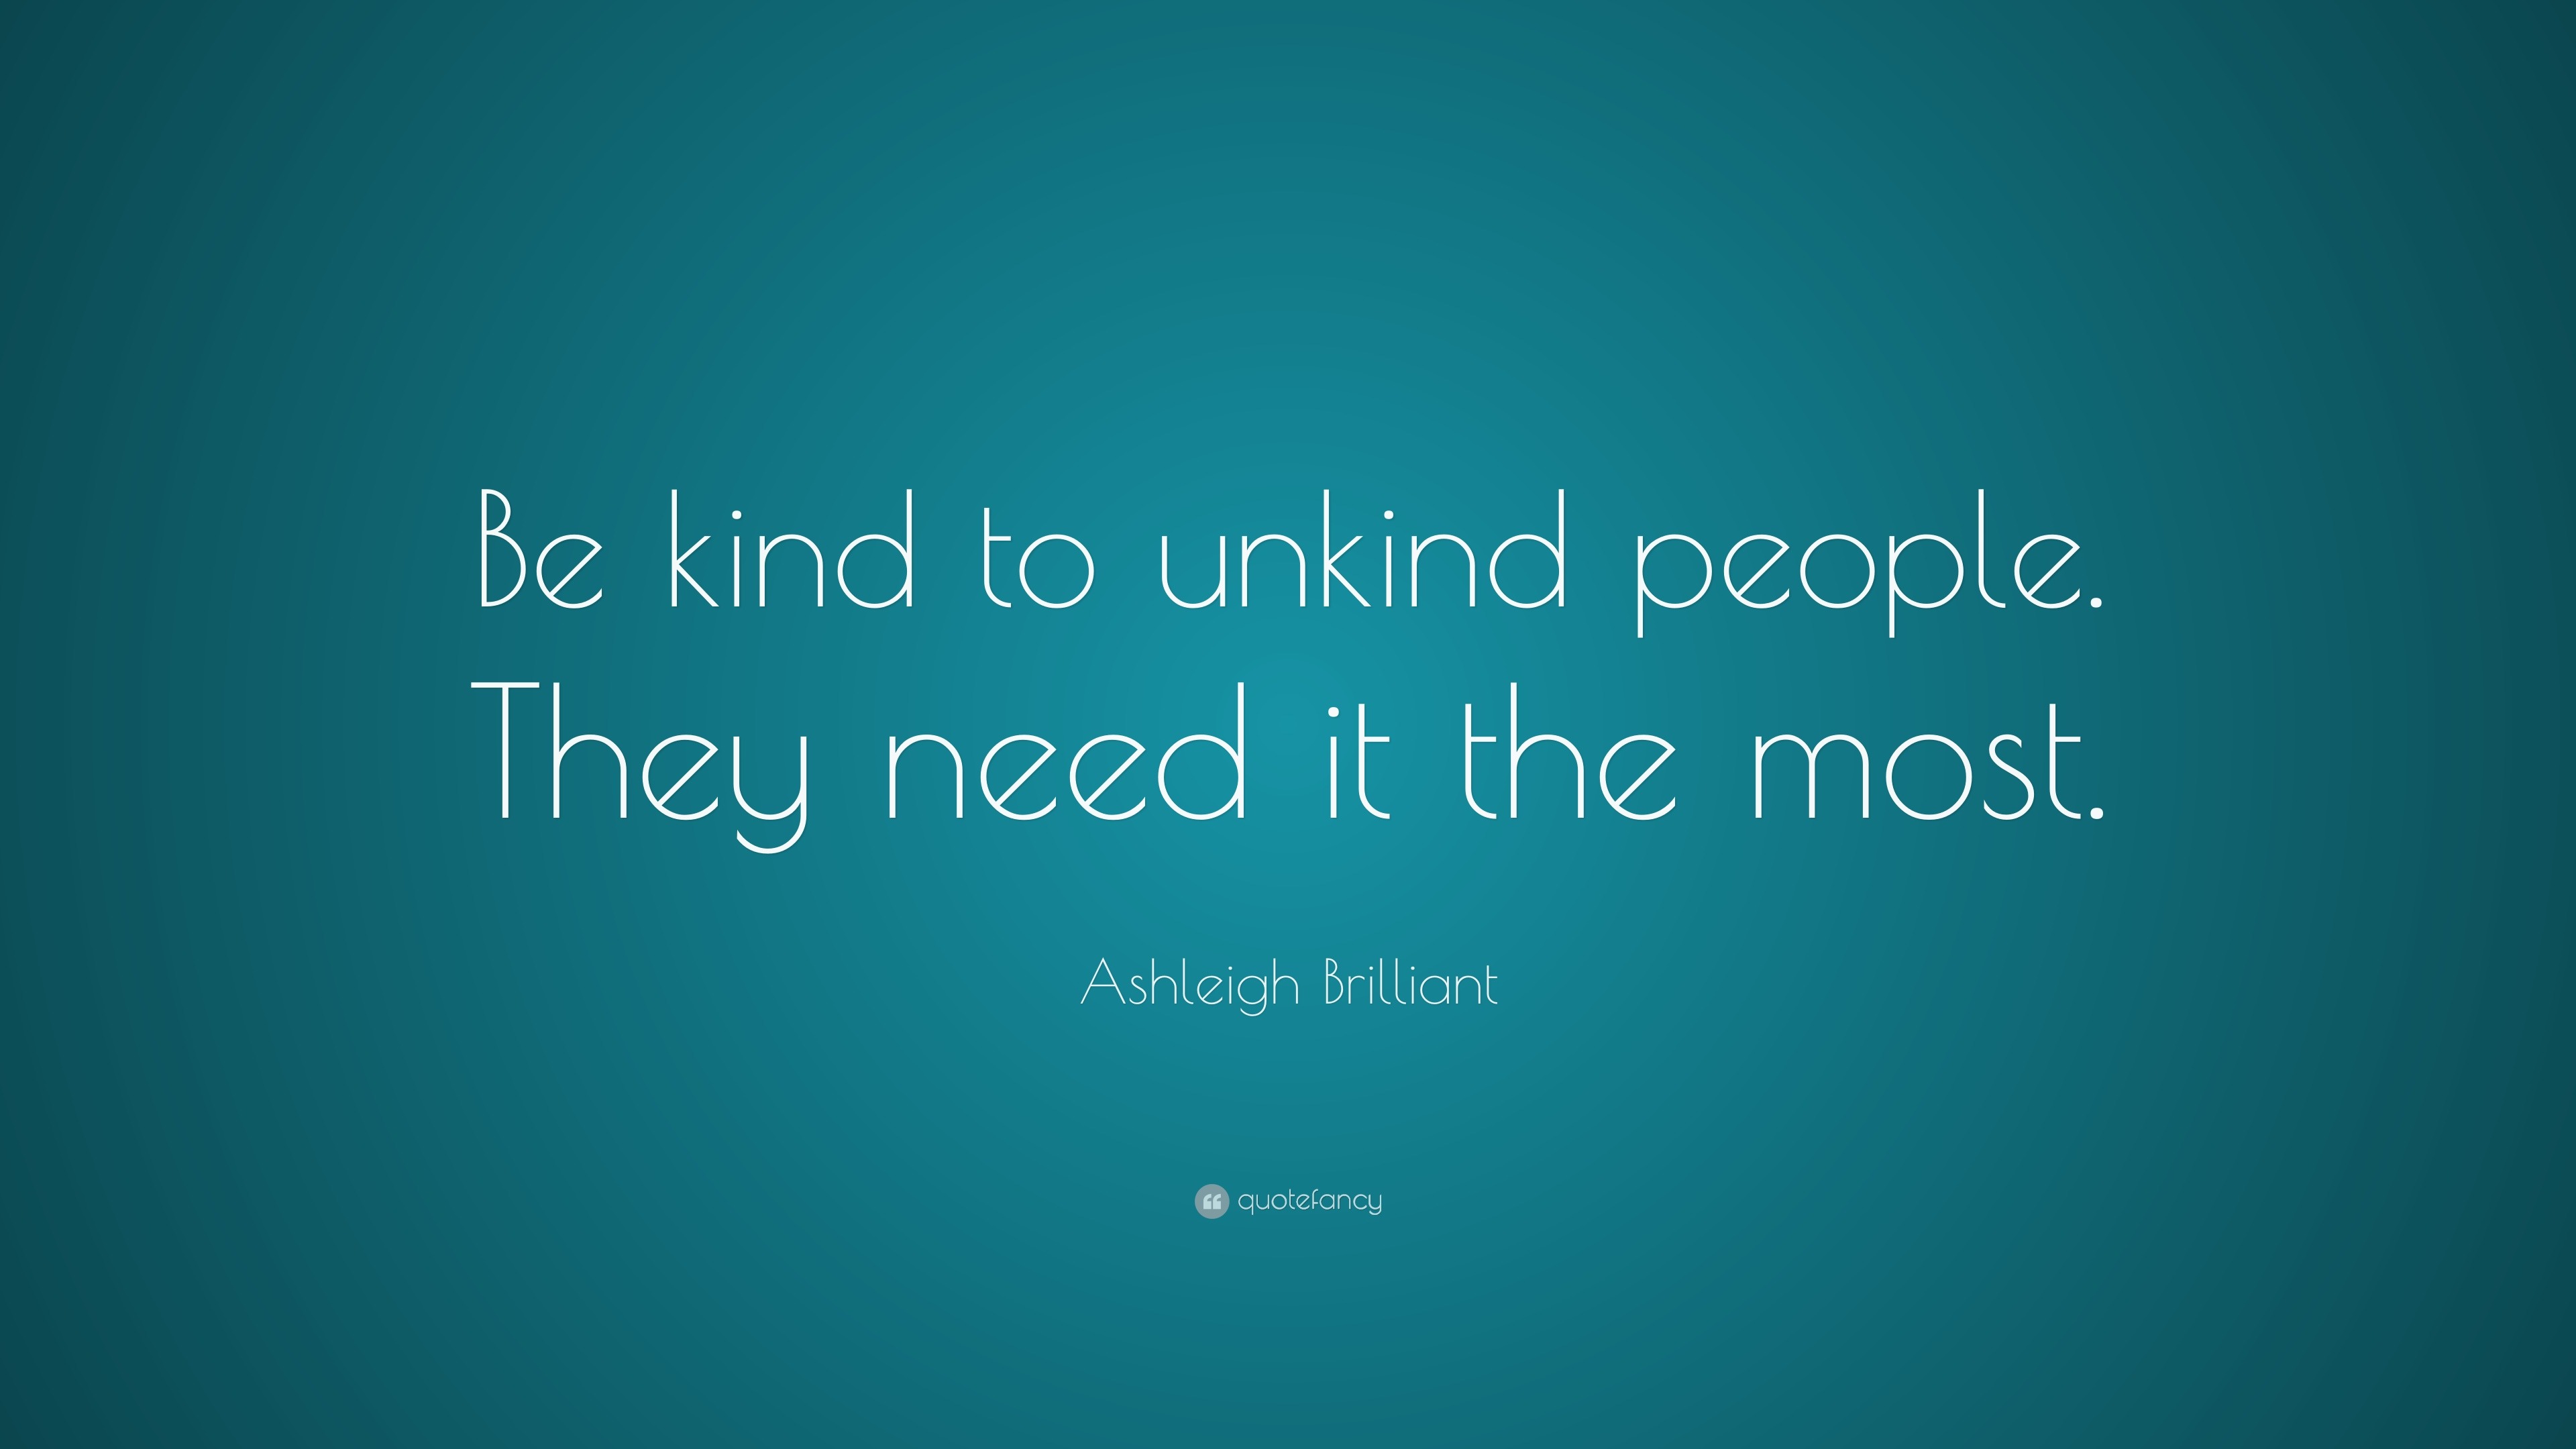 Ashleigh Brilliant Quote: “Be kind to unkind people. They need it the